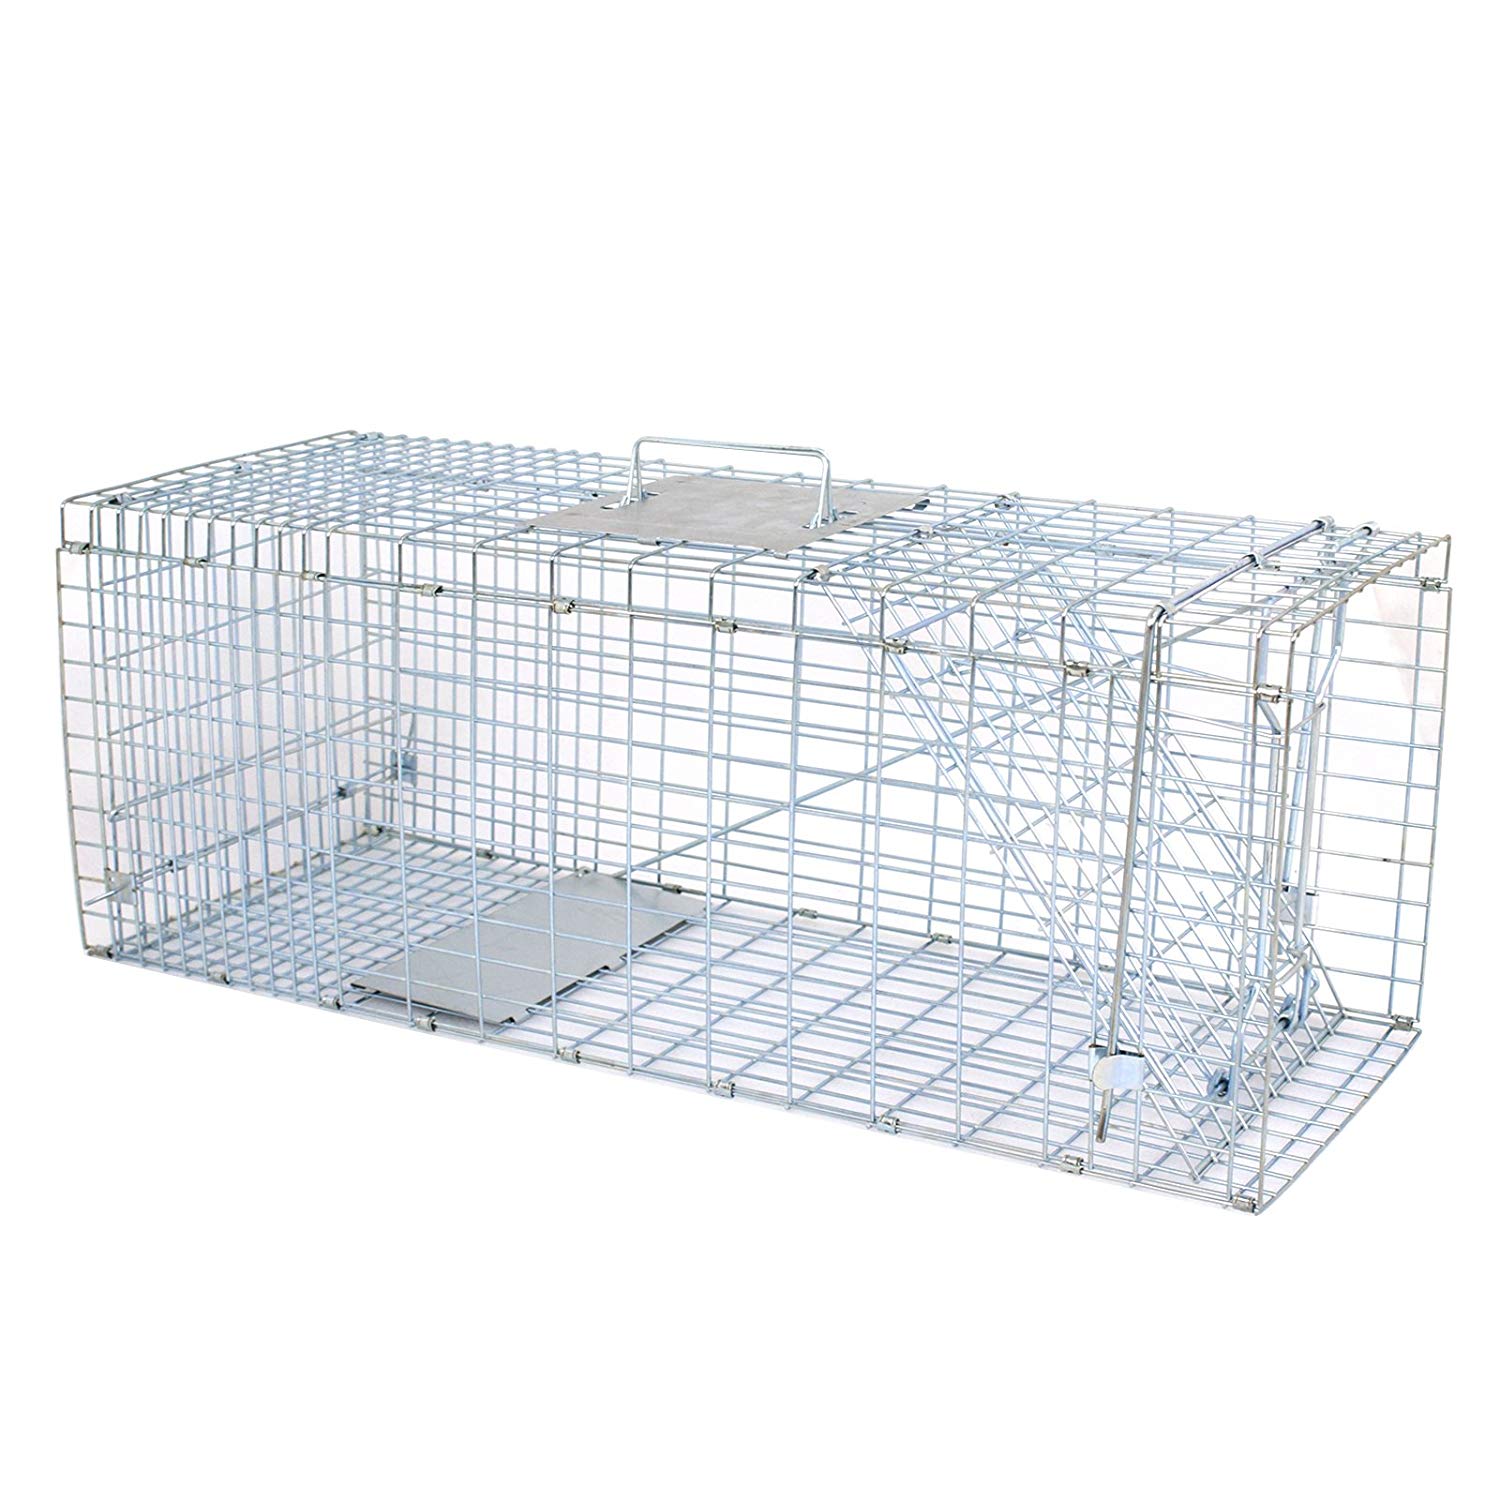 How To Set Up Animal Trap Cage - Catch Feral Cats, Raccoons, Squirrels,  other small animals! 